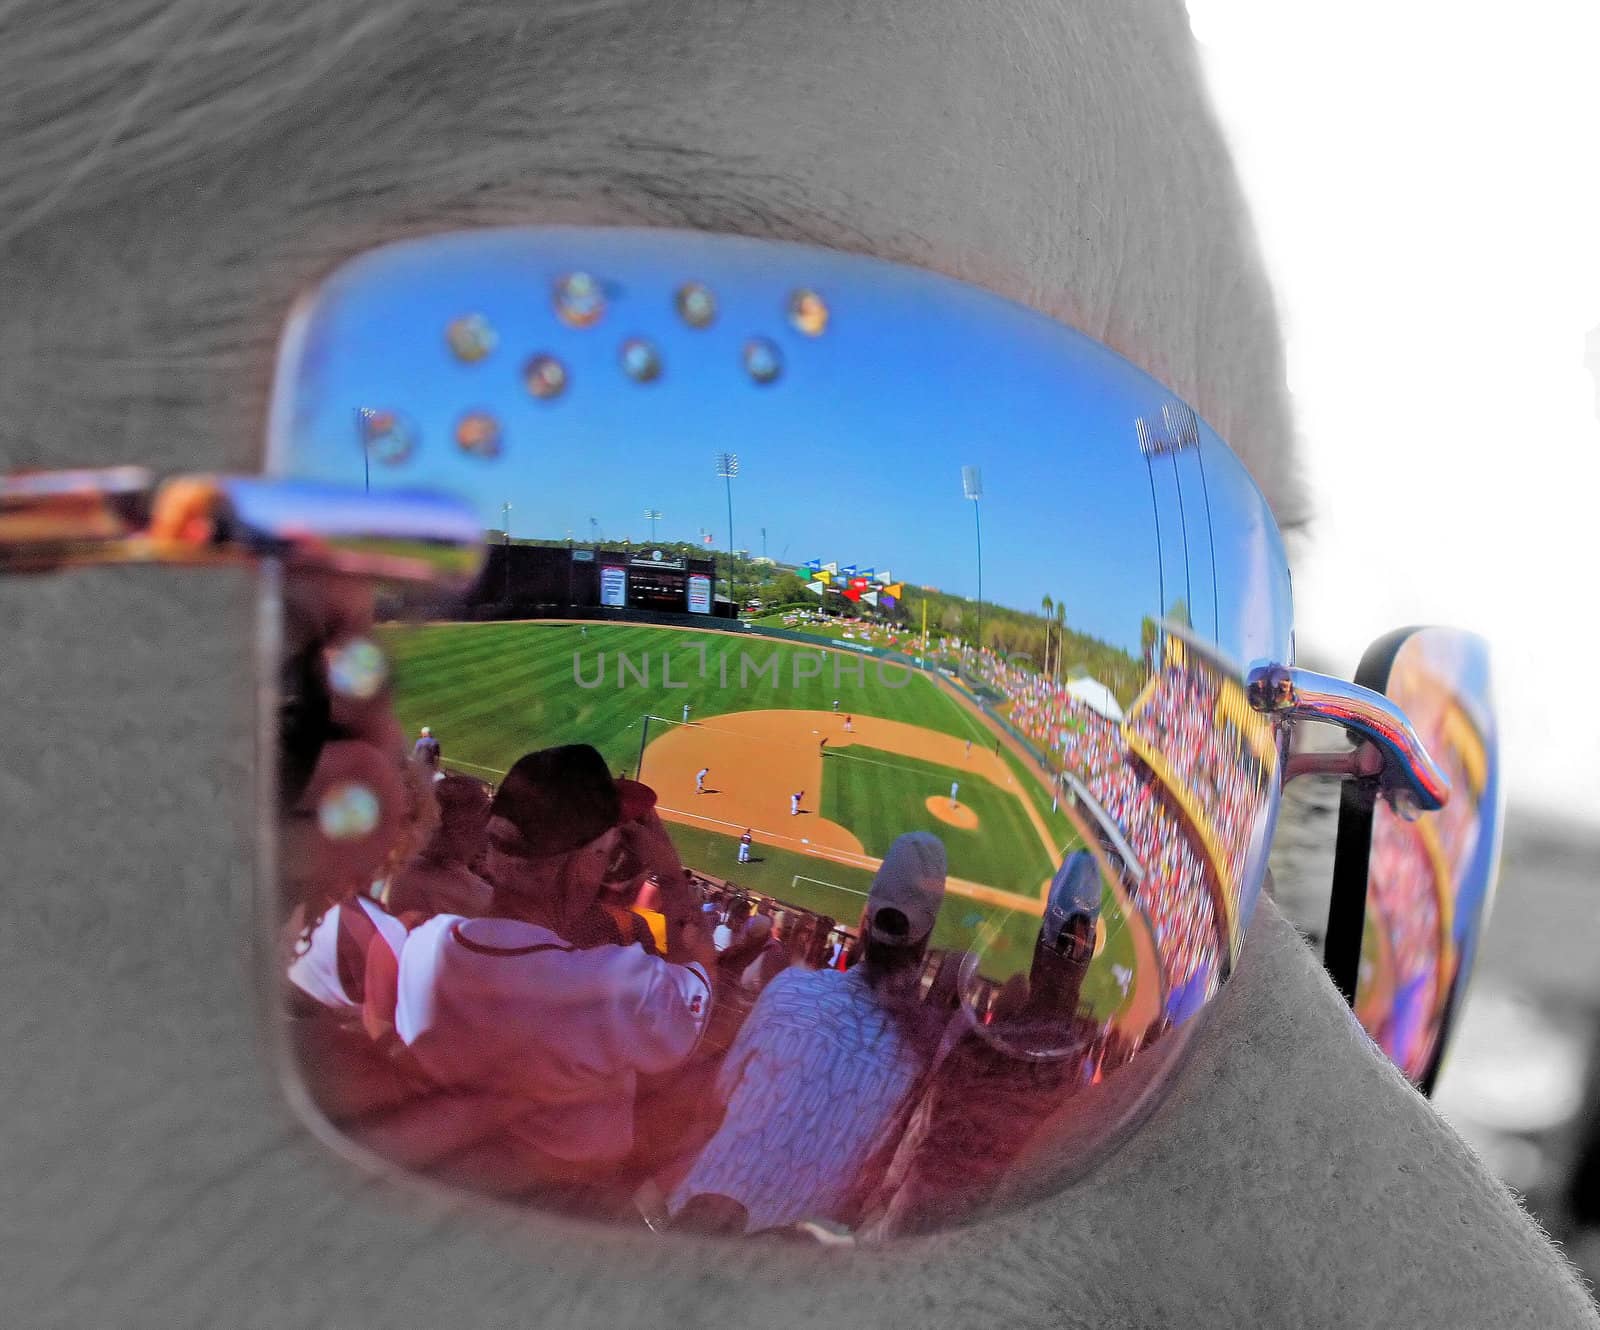 A baseball game reflected in the sunglasses.